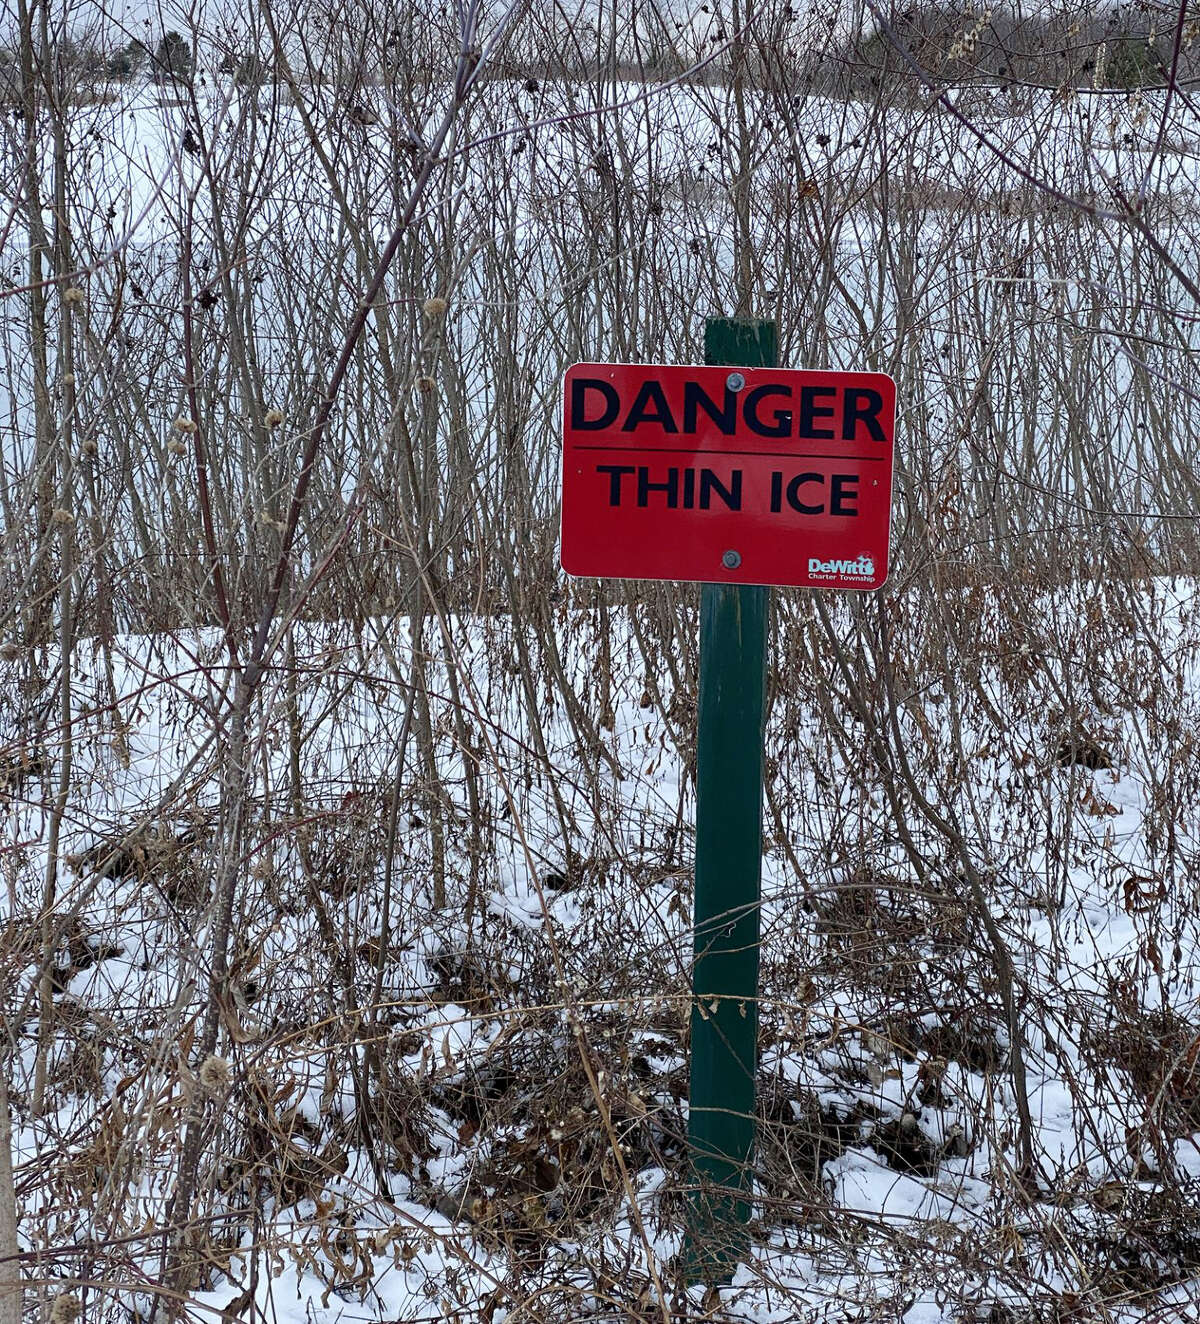 When on or near ice, always use extreme caution because there is no reliable way to test ice thickness. For more safety tips, including what to do if you fall through the ice, go to Michigan.gov/IceSafety.